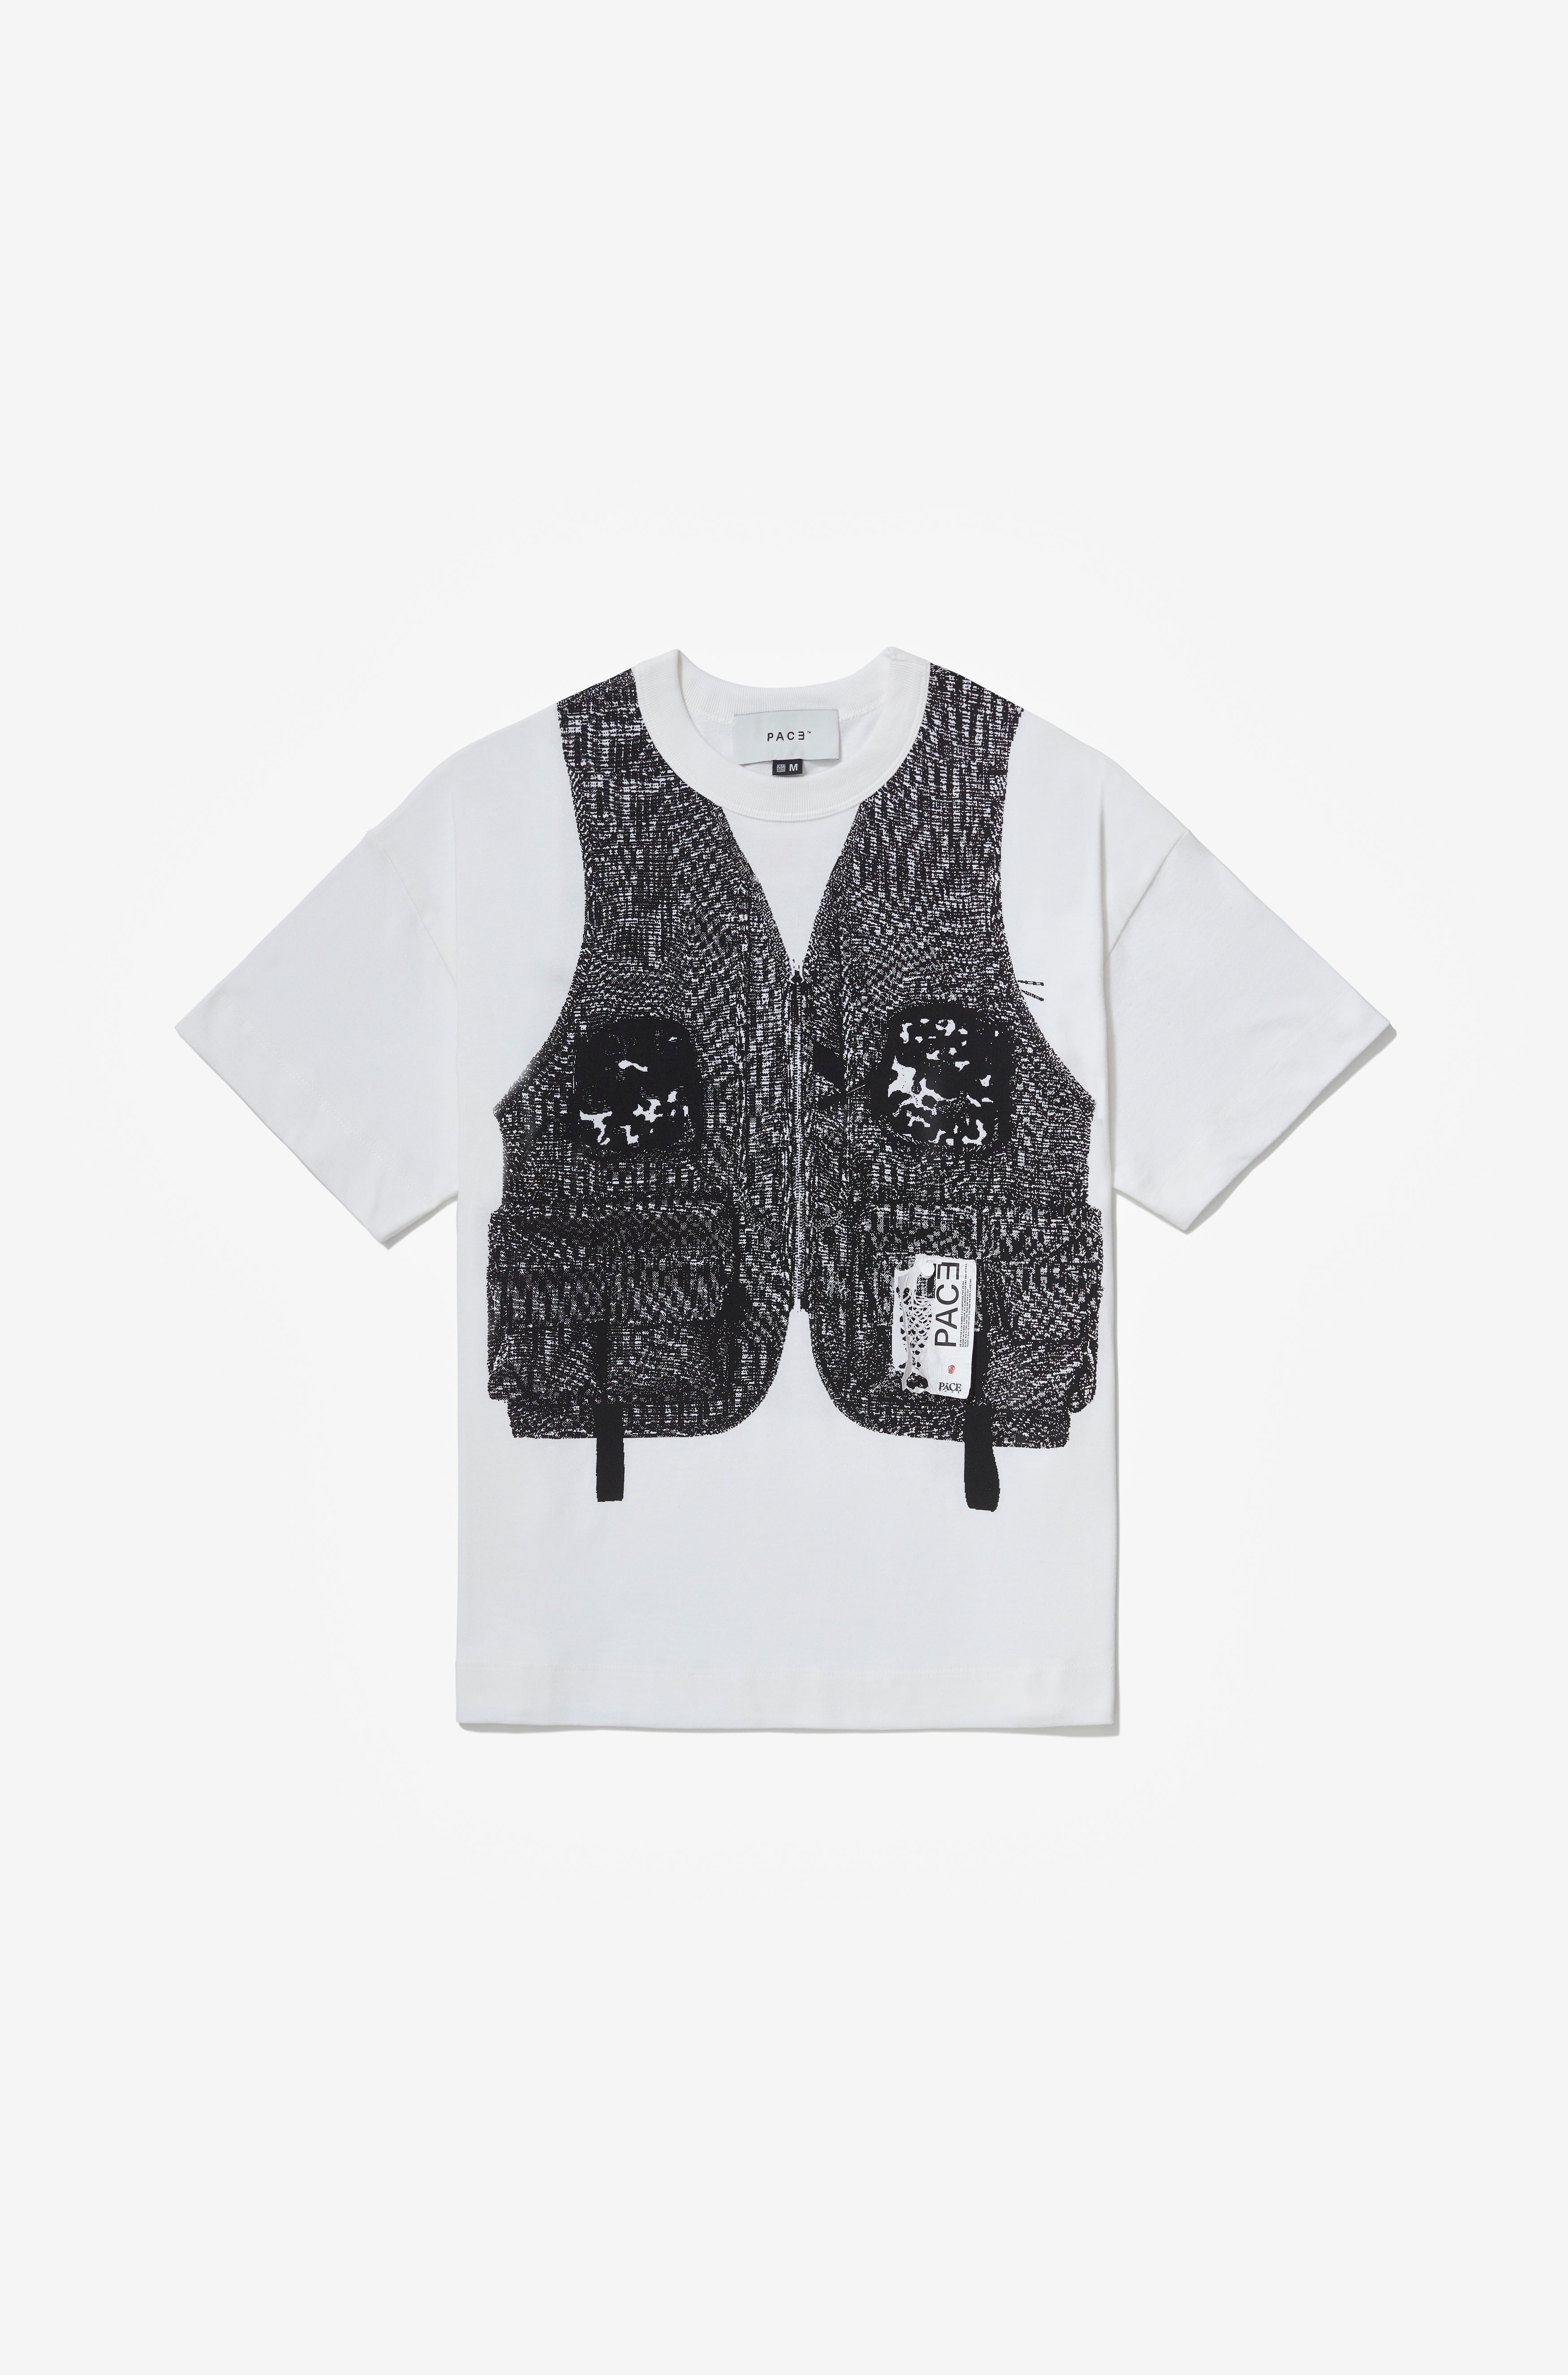 PACE - T-Shirt Army Vest Off White Regular